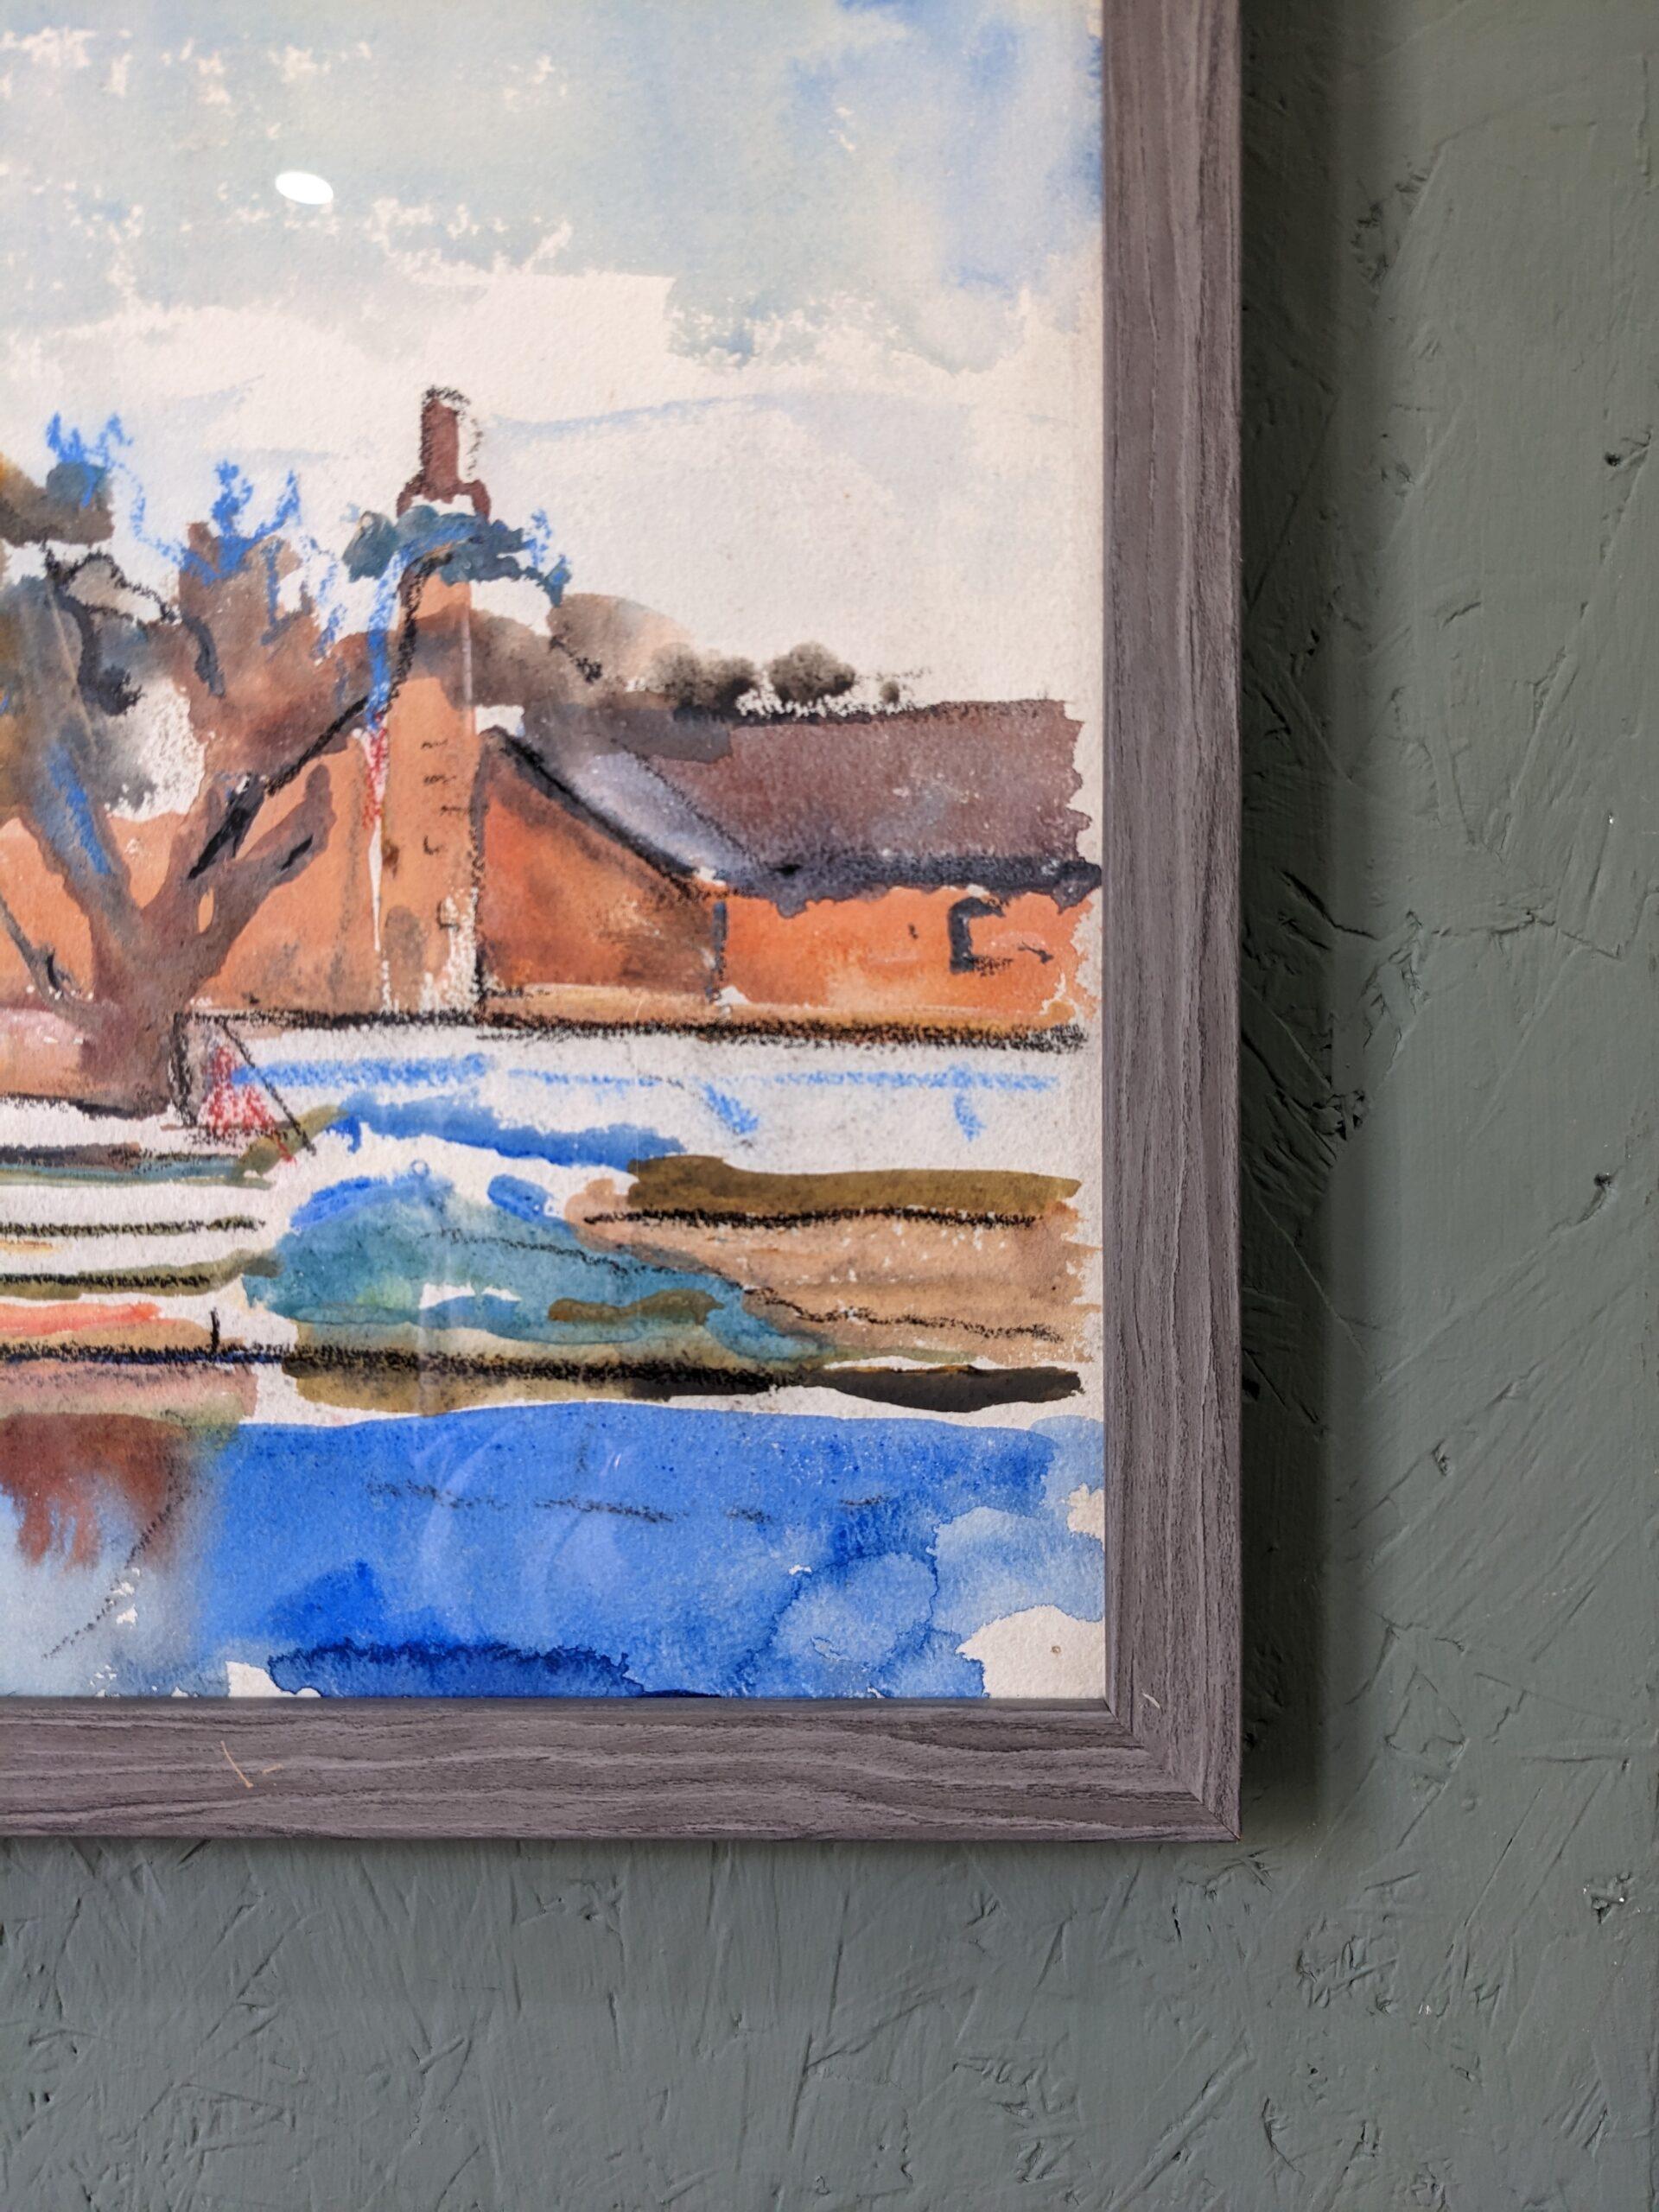 The Waterway
Size: 43.2 x 31.7cm (including frame)
Watercolour

A calm and tranquil watercolour artwork that would stand out in any interior.

A waterway is presented in front of a row of houses in a suburban neighbourhood. The sky is blue, and in